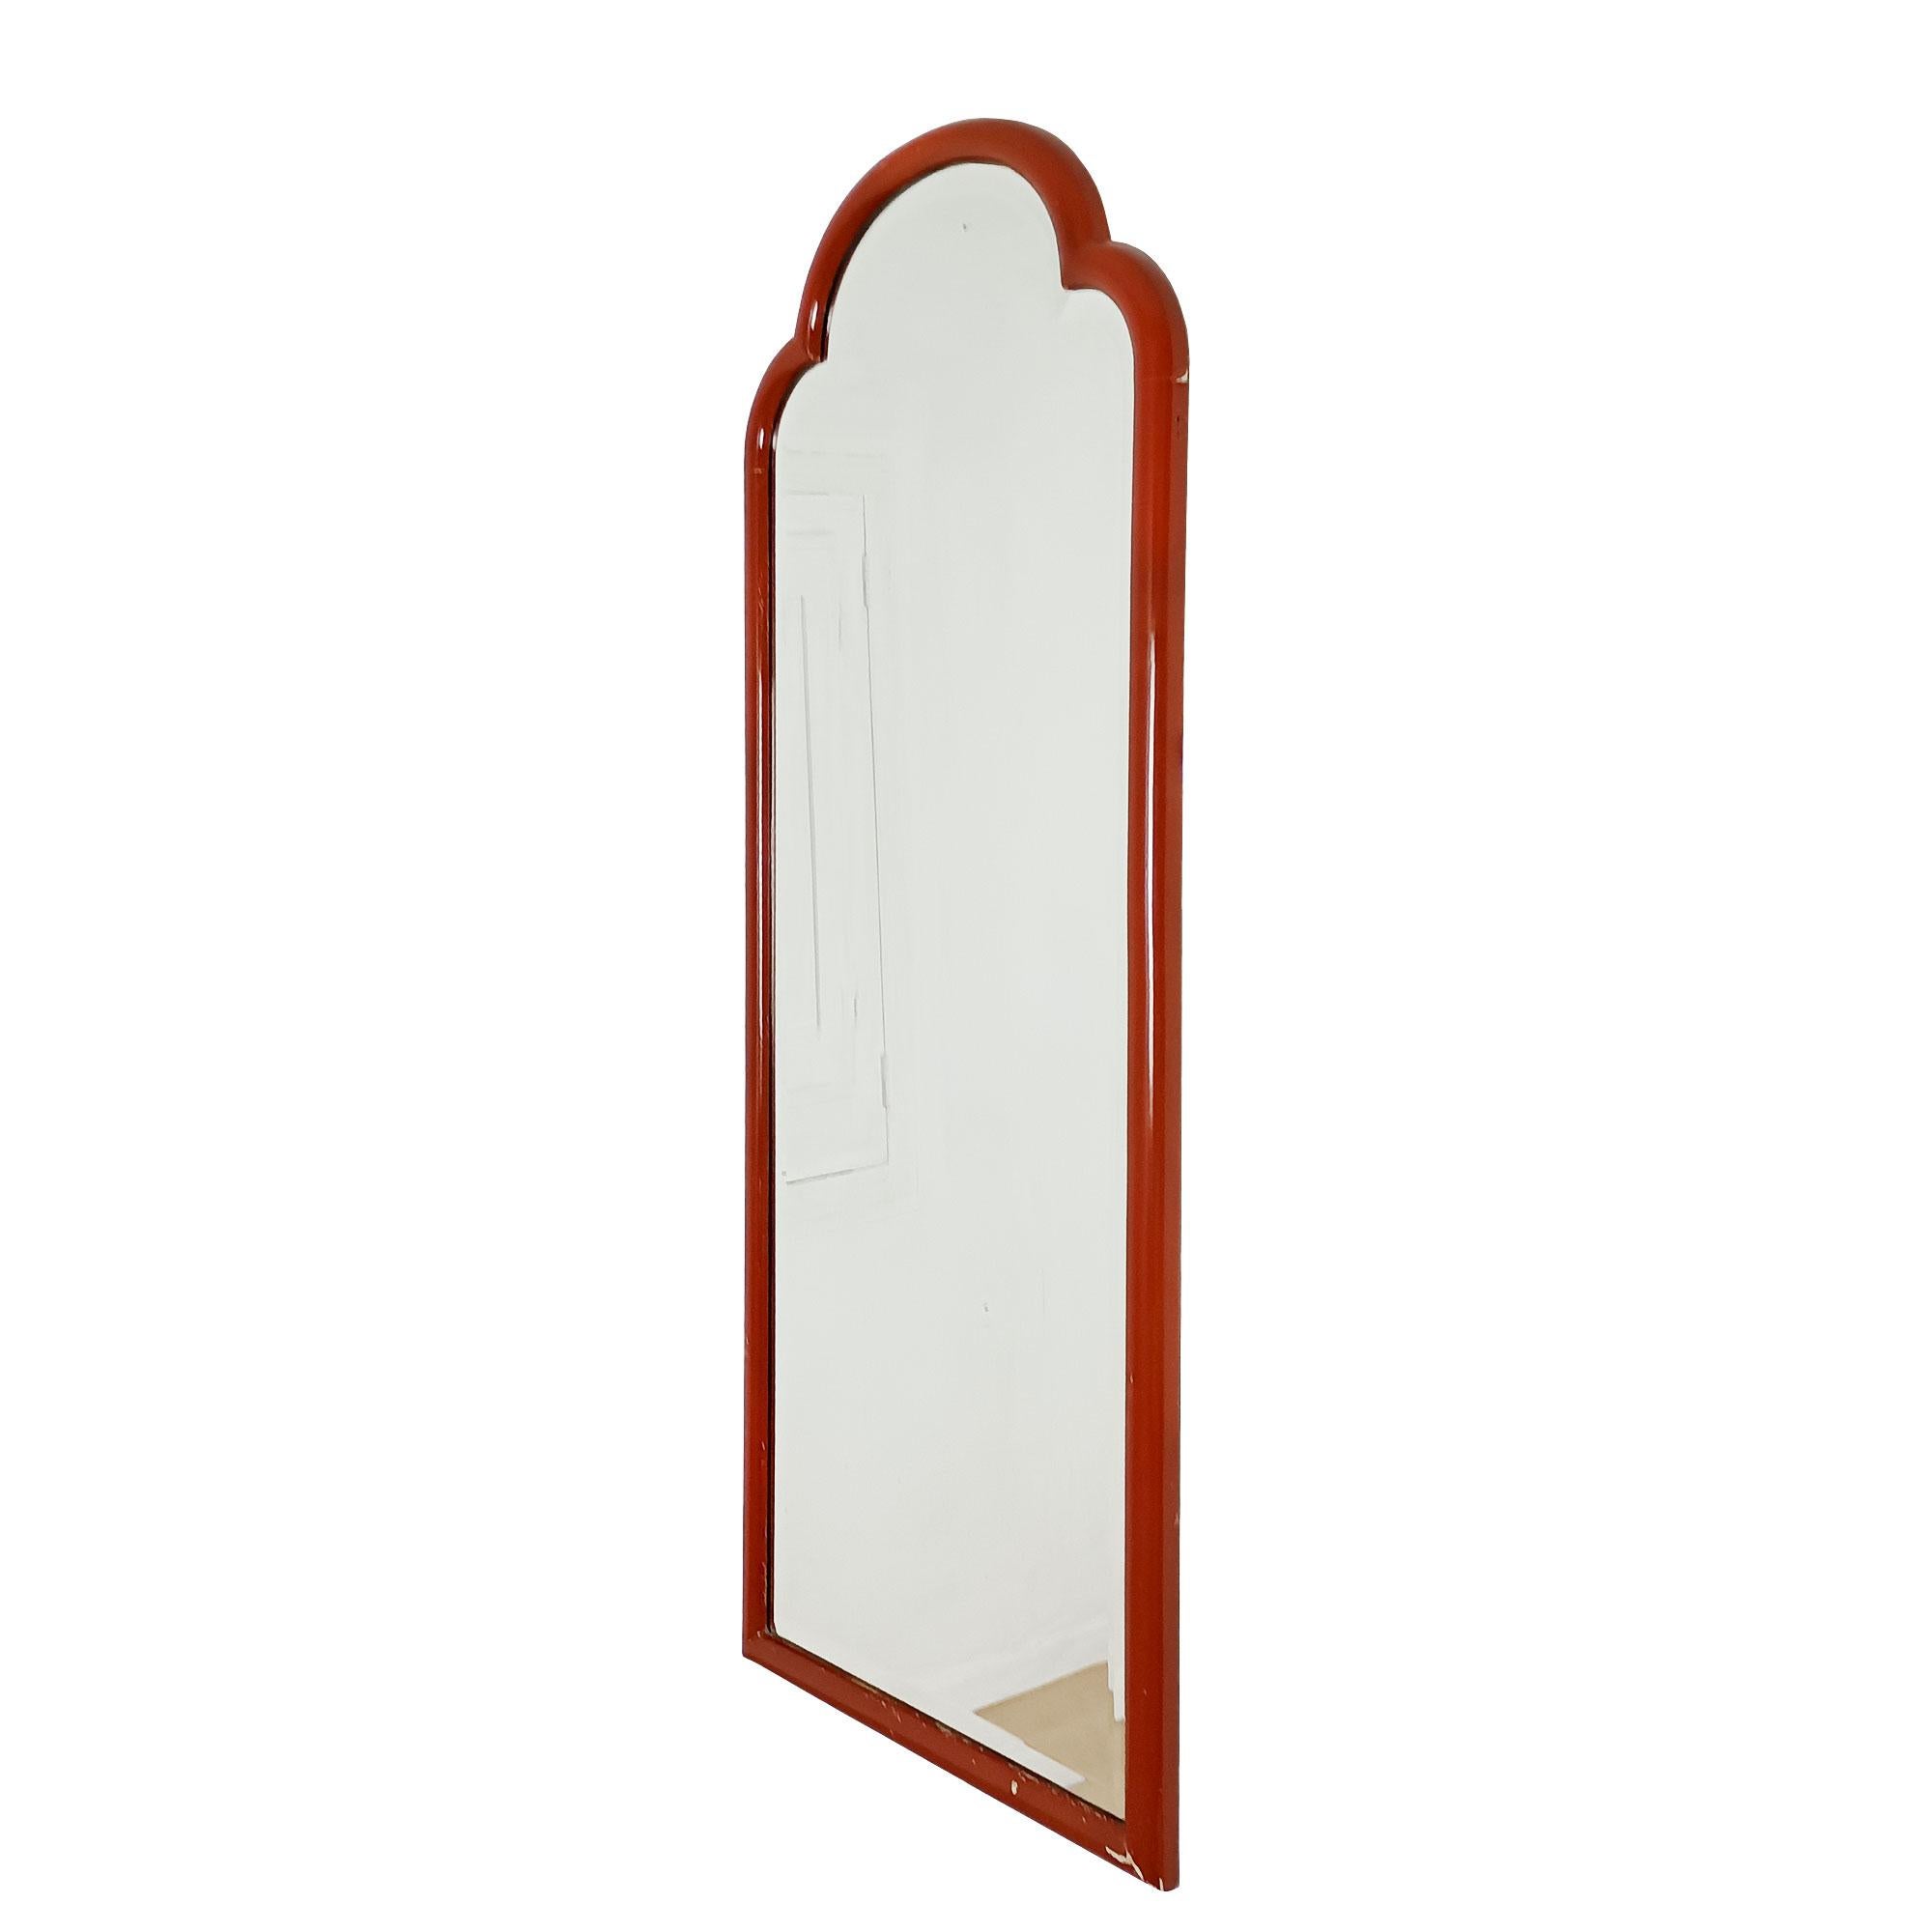 Large mirror with coral lacquered solid wood frame (original lacquer), thick mirror with wide bevel.

Supposedly made in French Indochina around 1925.